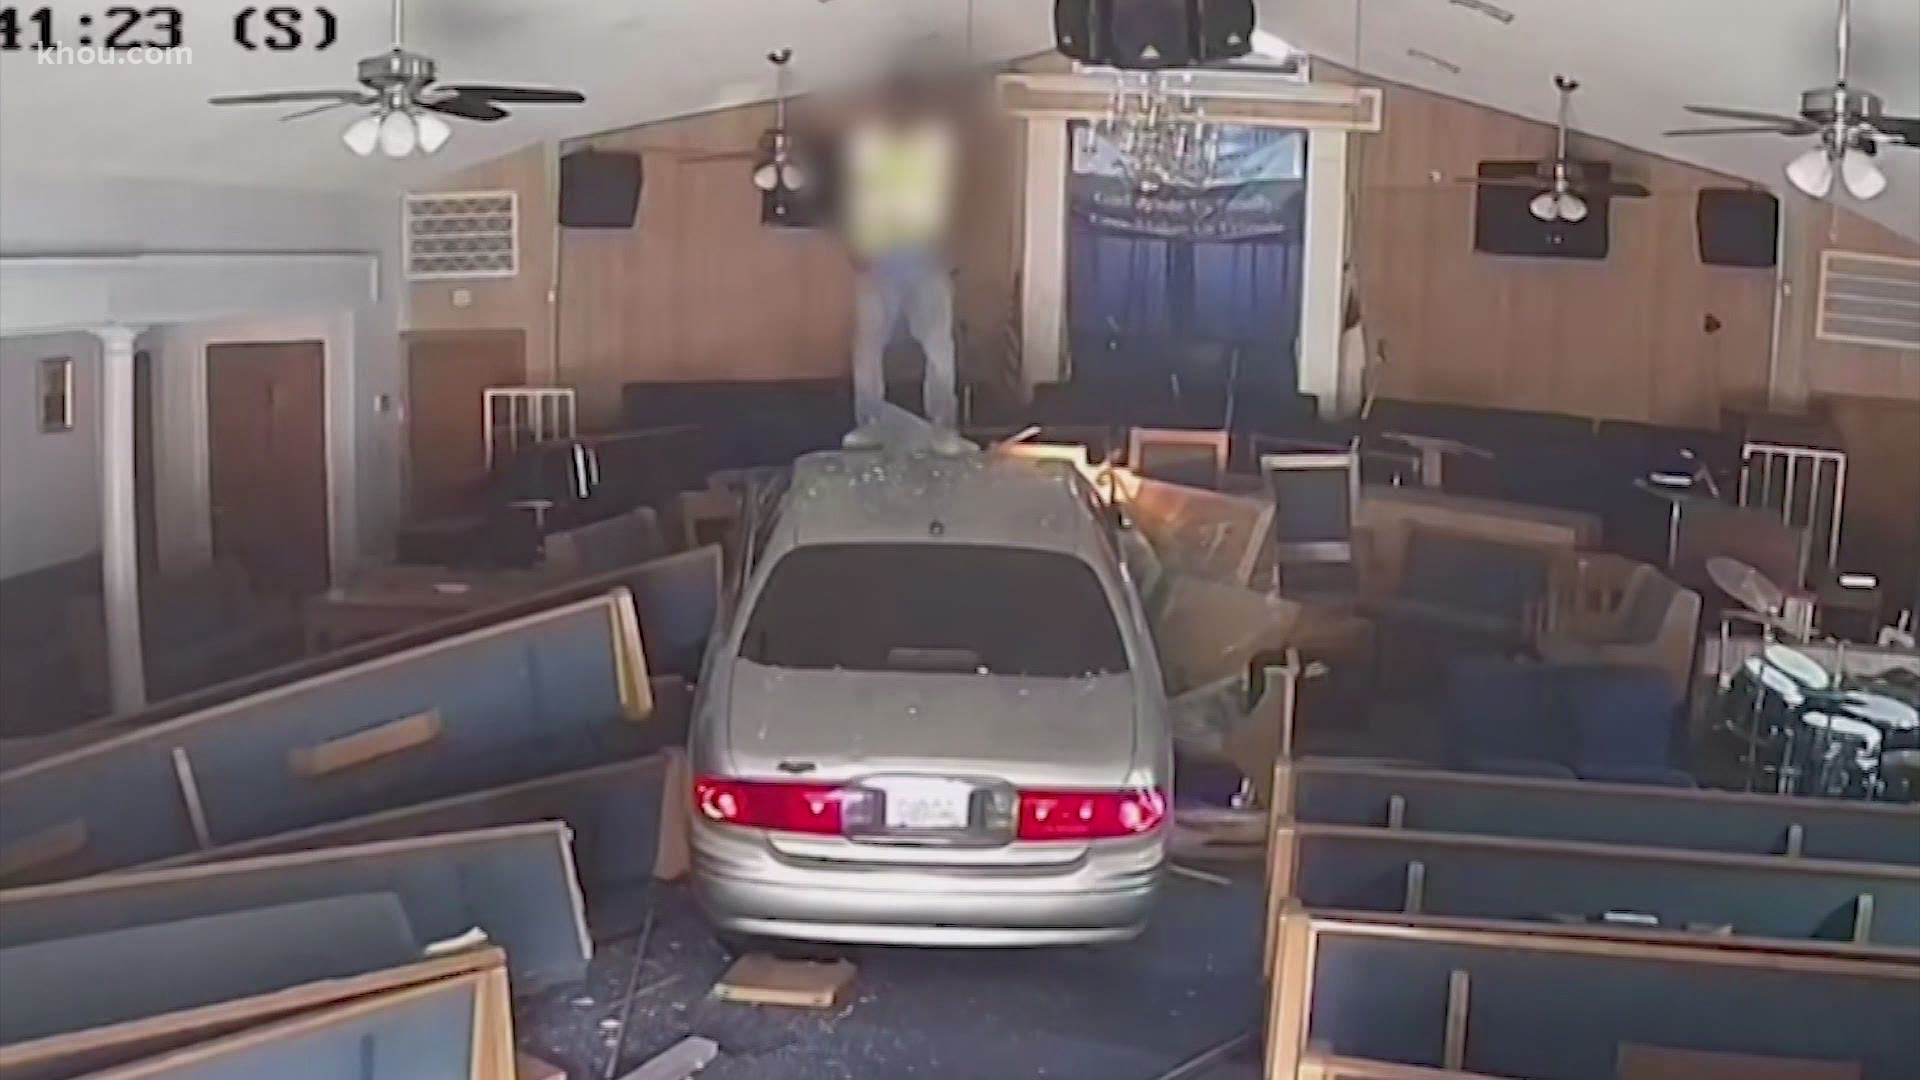 According to Houston police, the suspect tried to run away after slamming into the church and jumping on top of the car. It was captured on church suveillance.